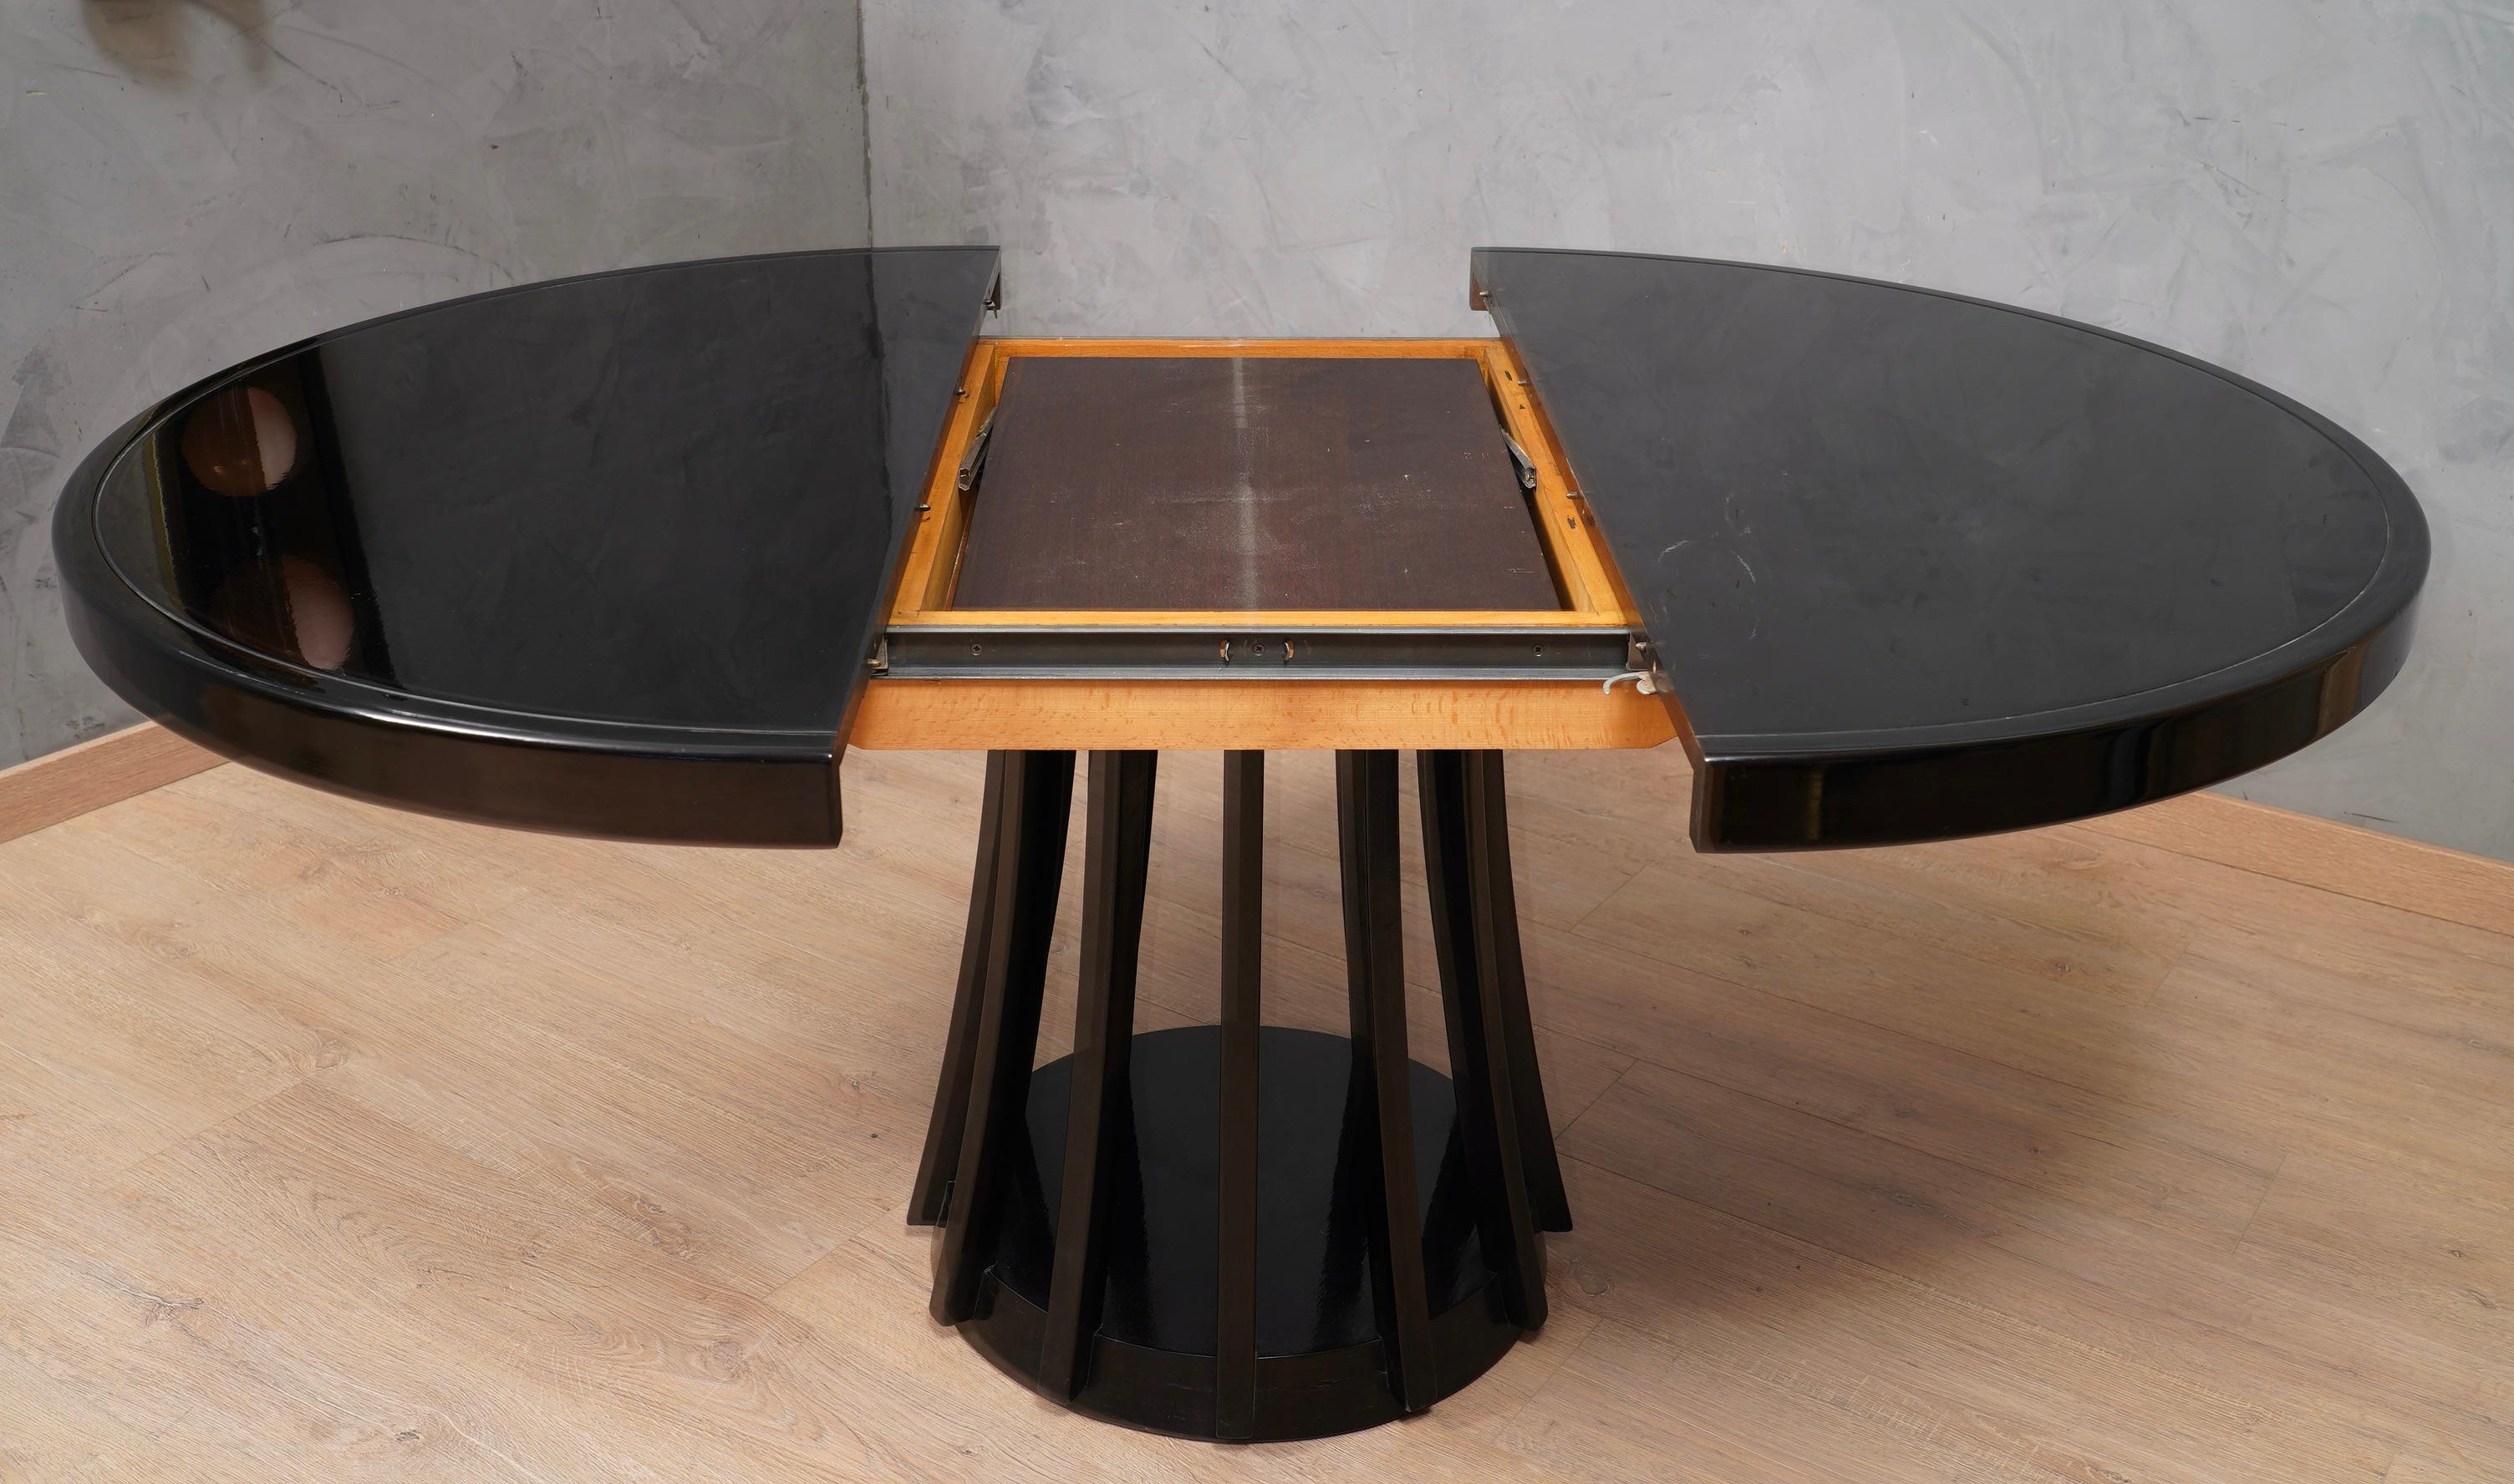 Mangiarotti Angelo Round Black Wood Dinning Table, 1970 For Sale 1